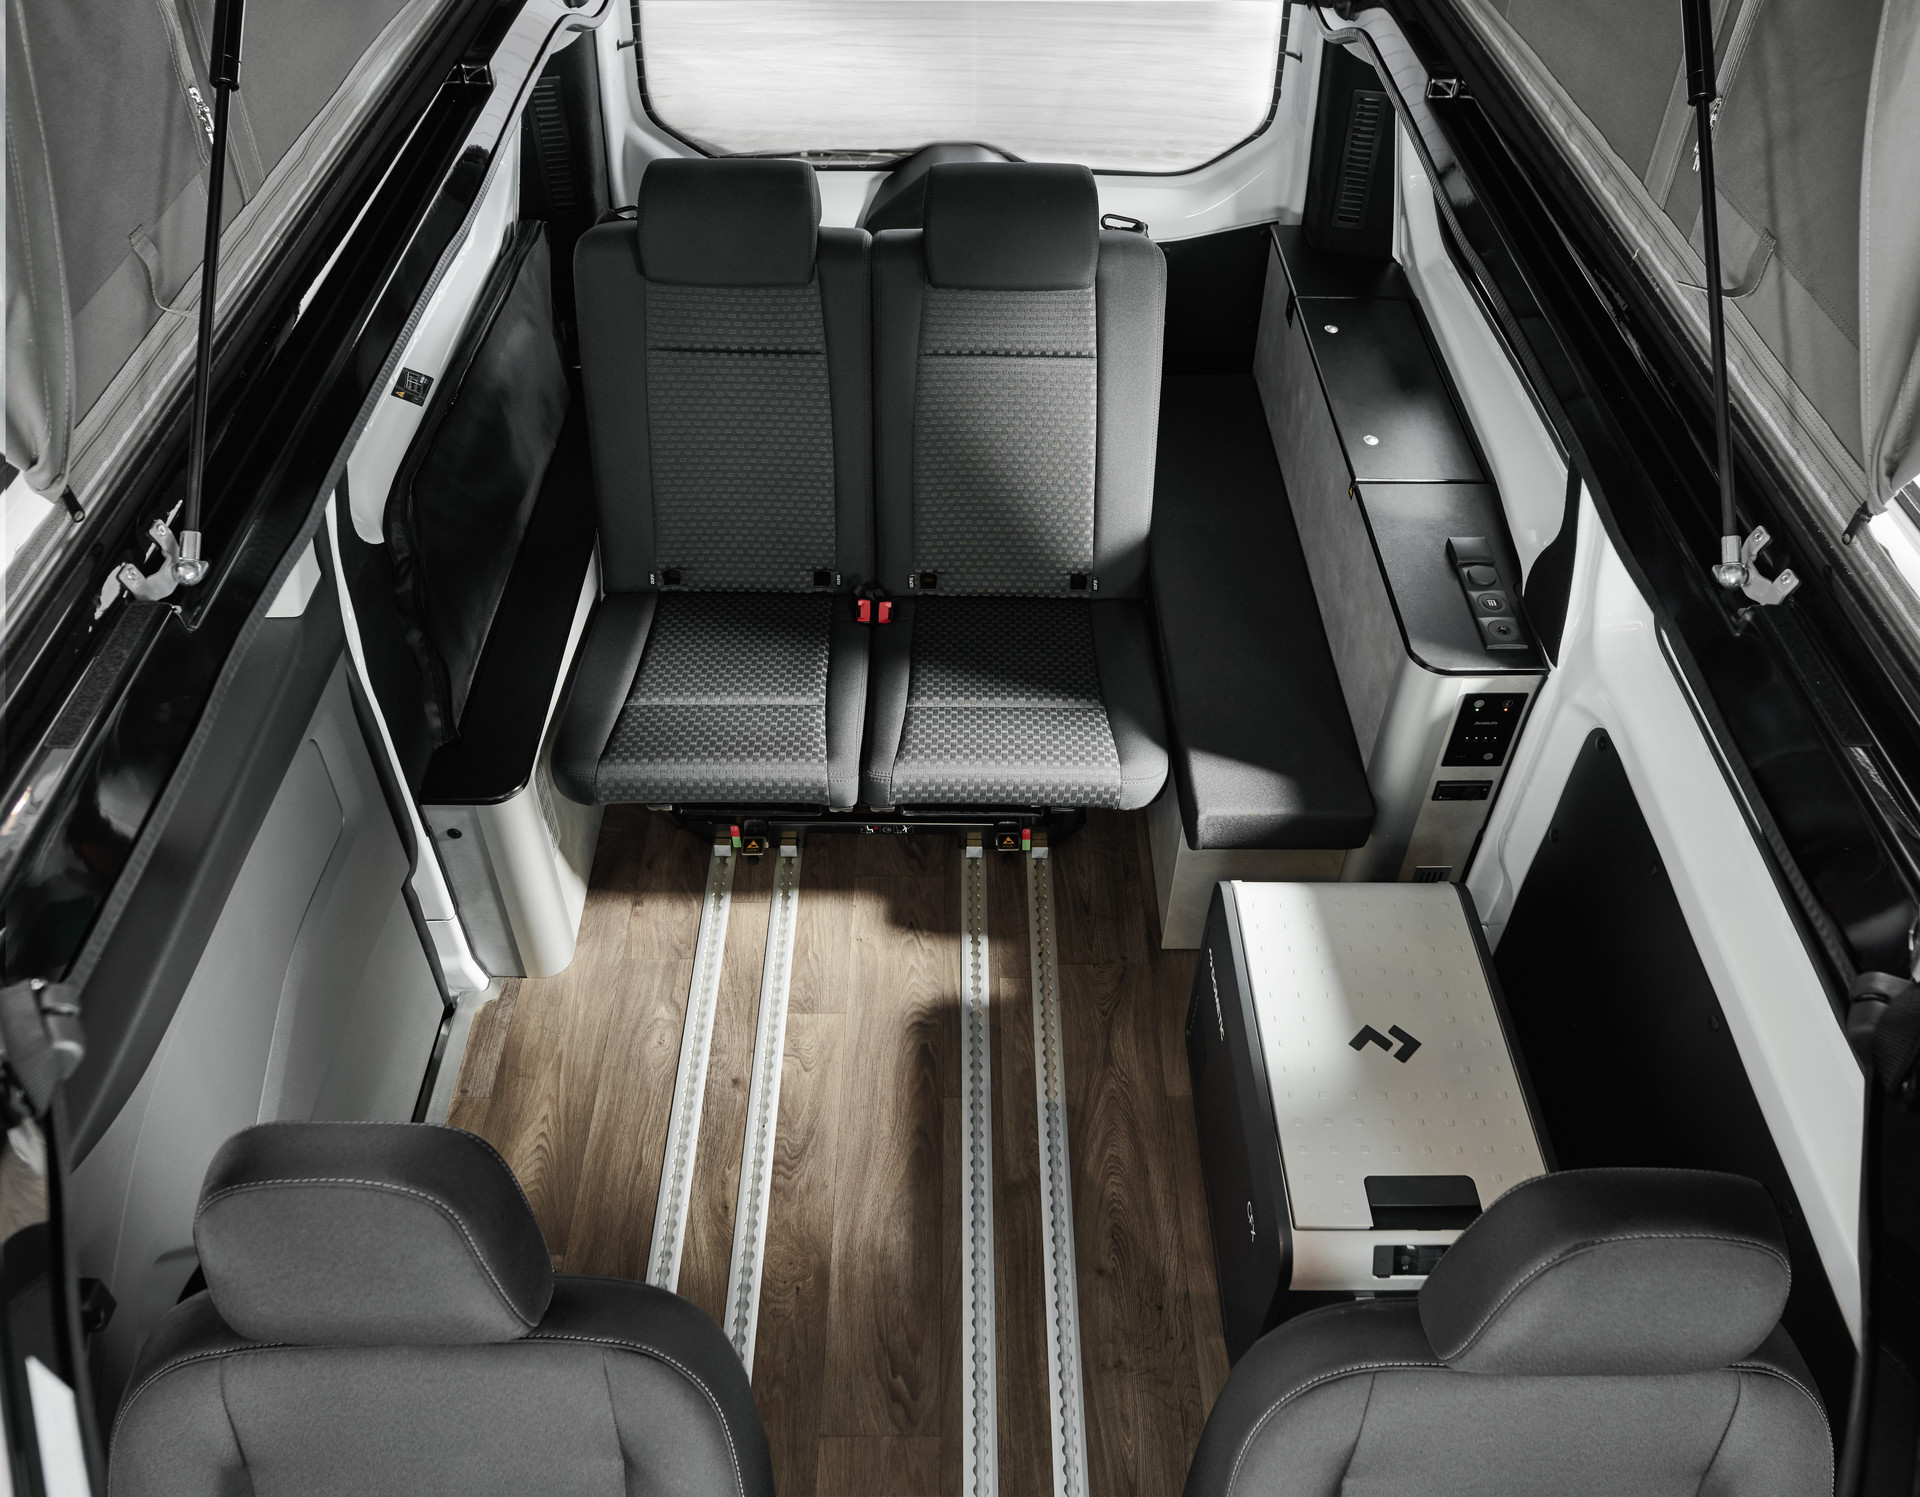 4-seater: The standard setup with four seats and four berths